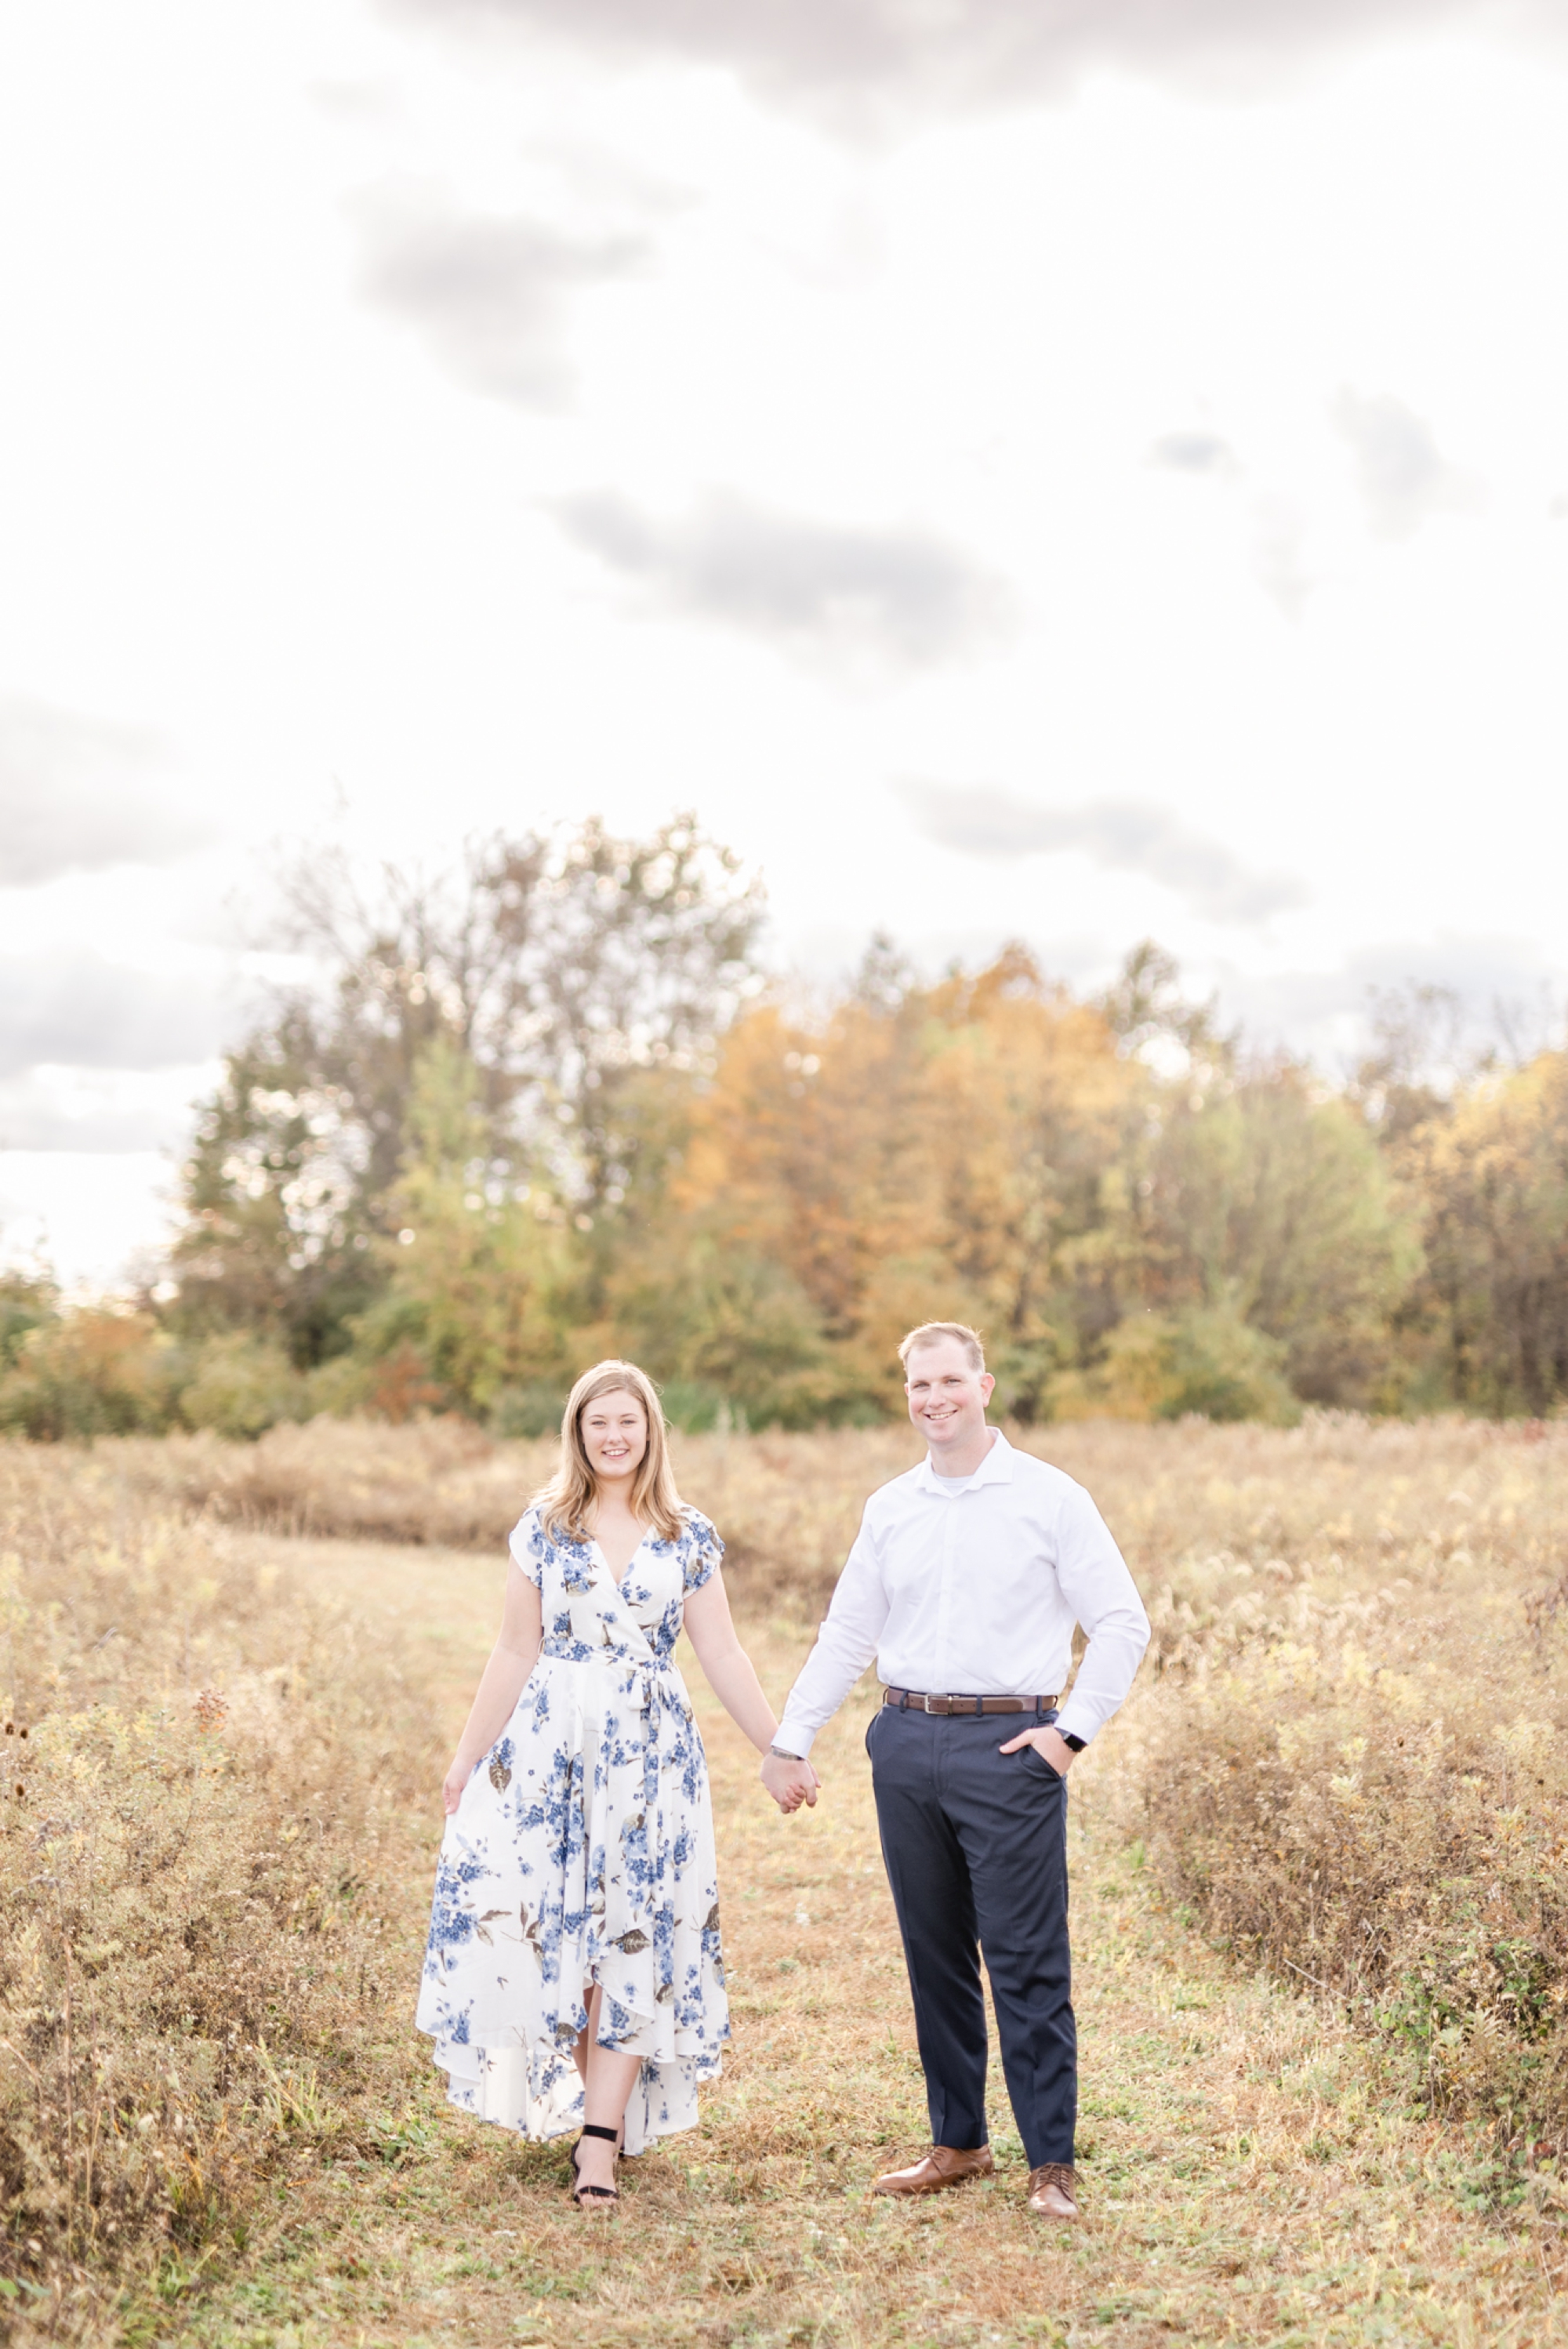 portrait-of-an-engaged-couple-standing-and-holding-hands-in-a-field